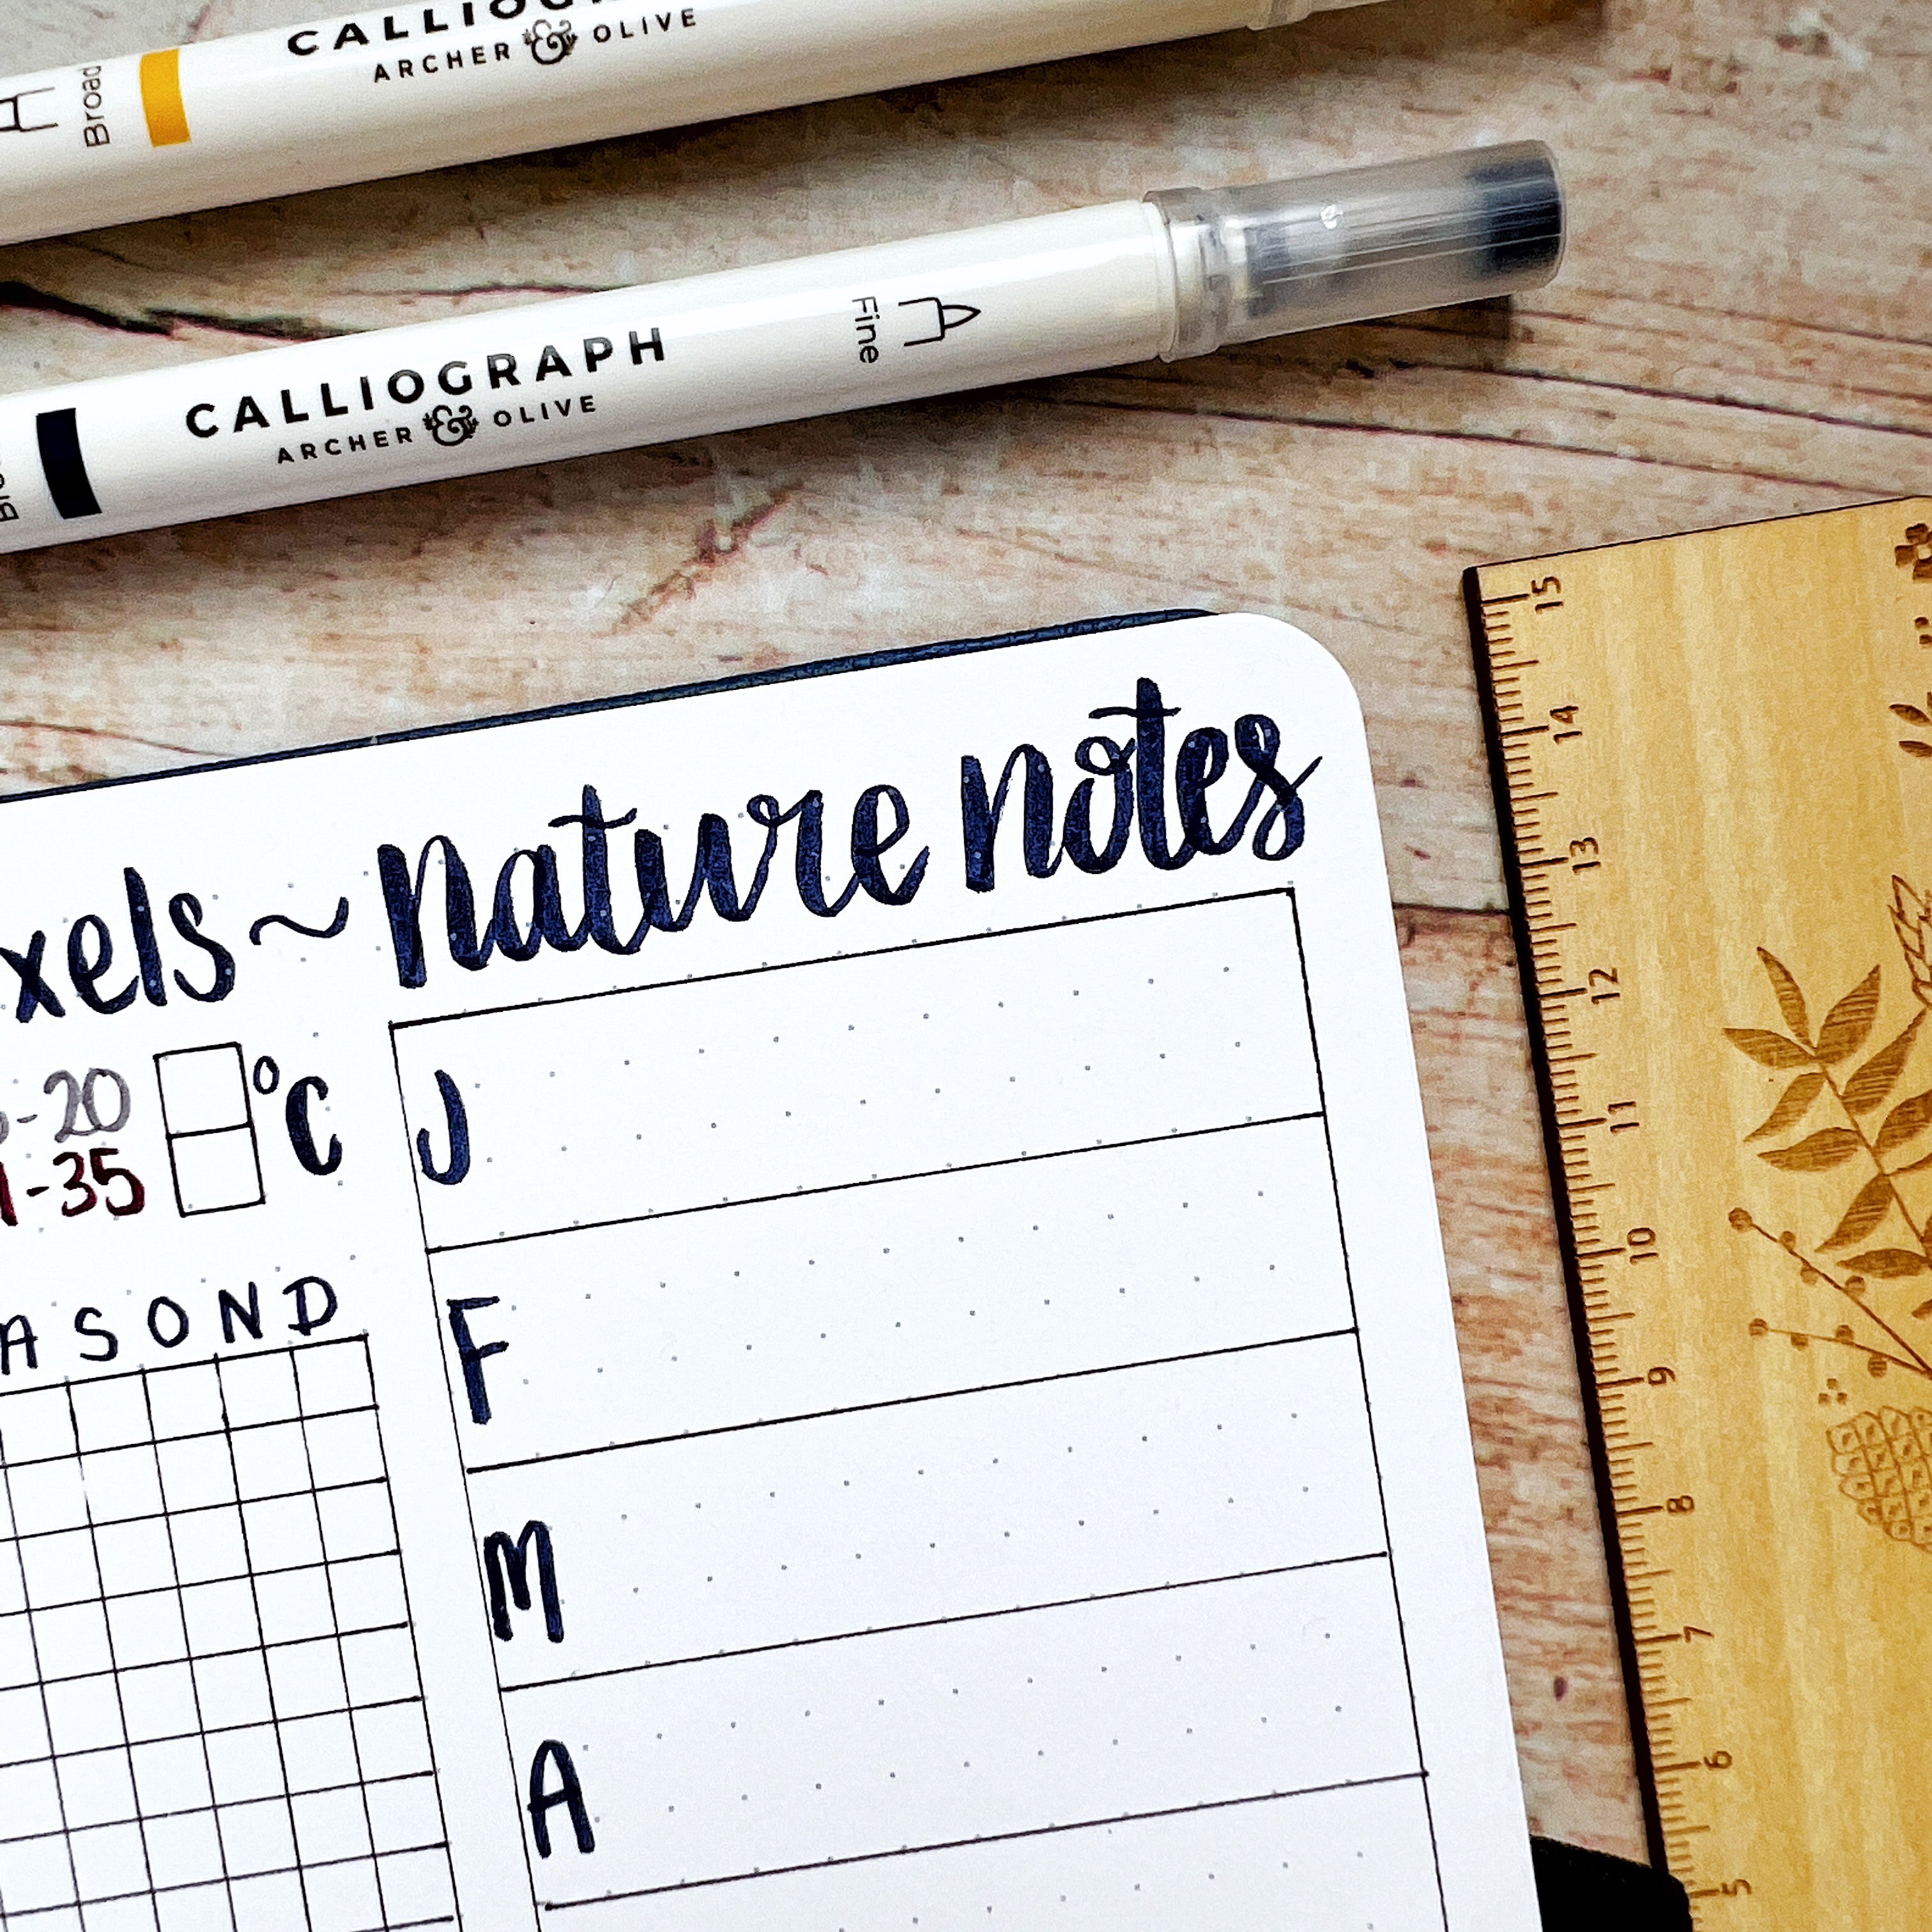 Table for nature notes each month